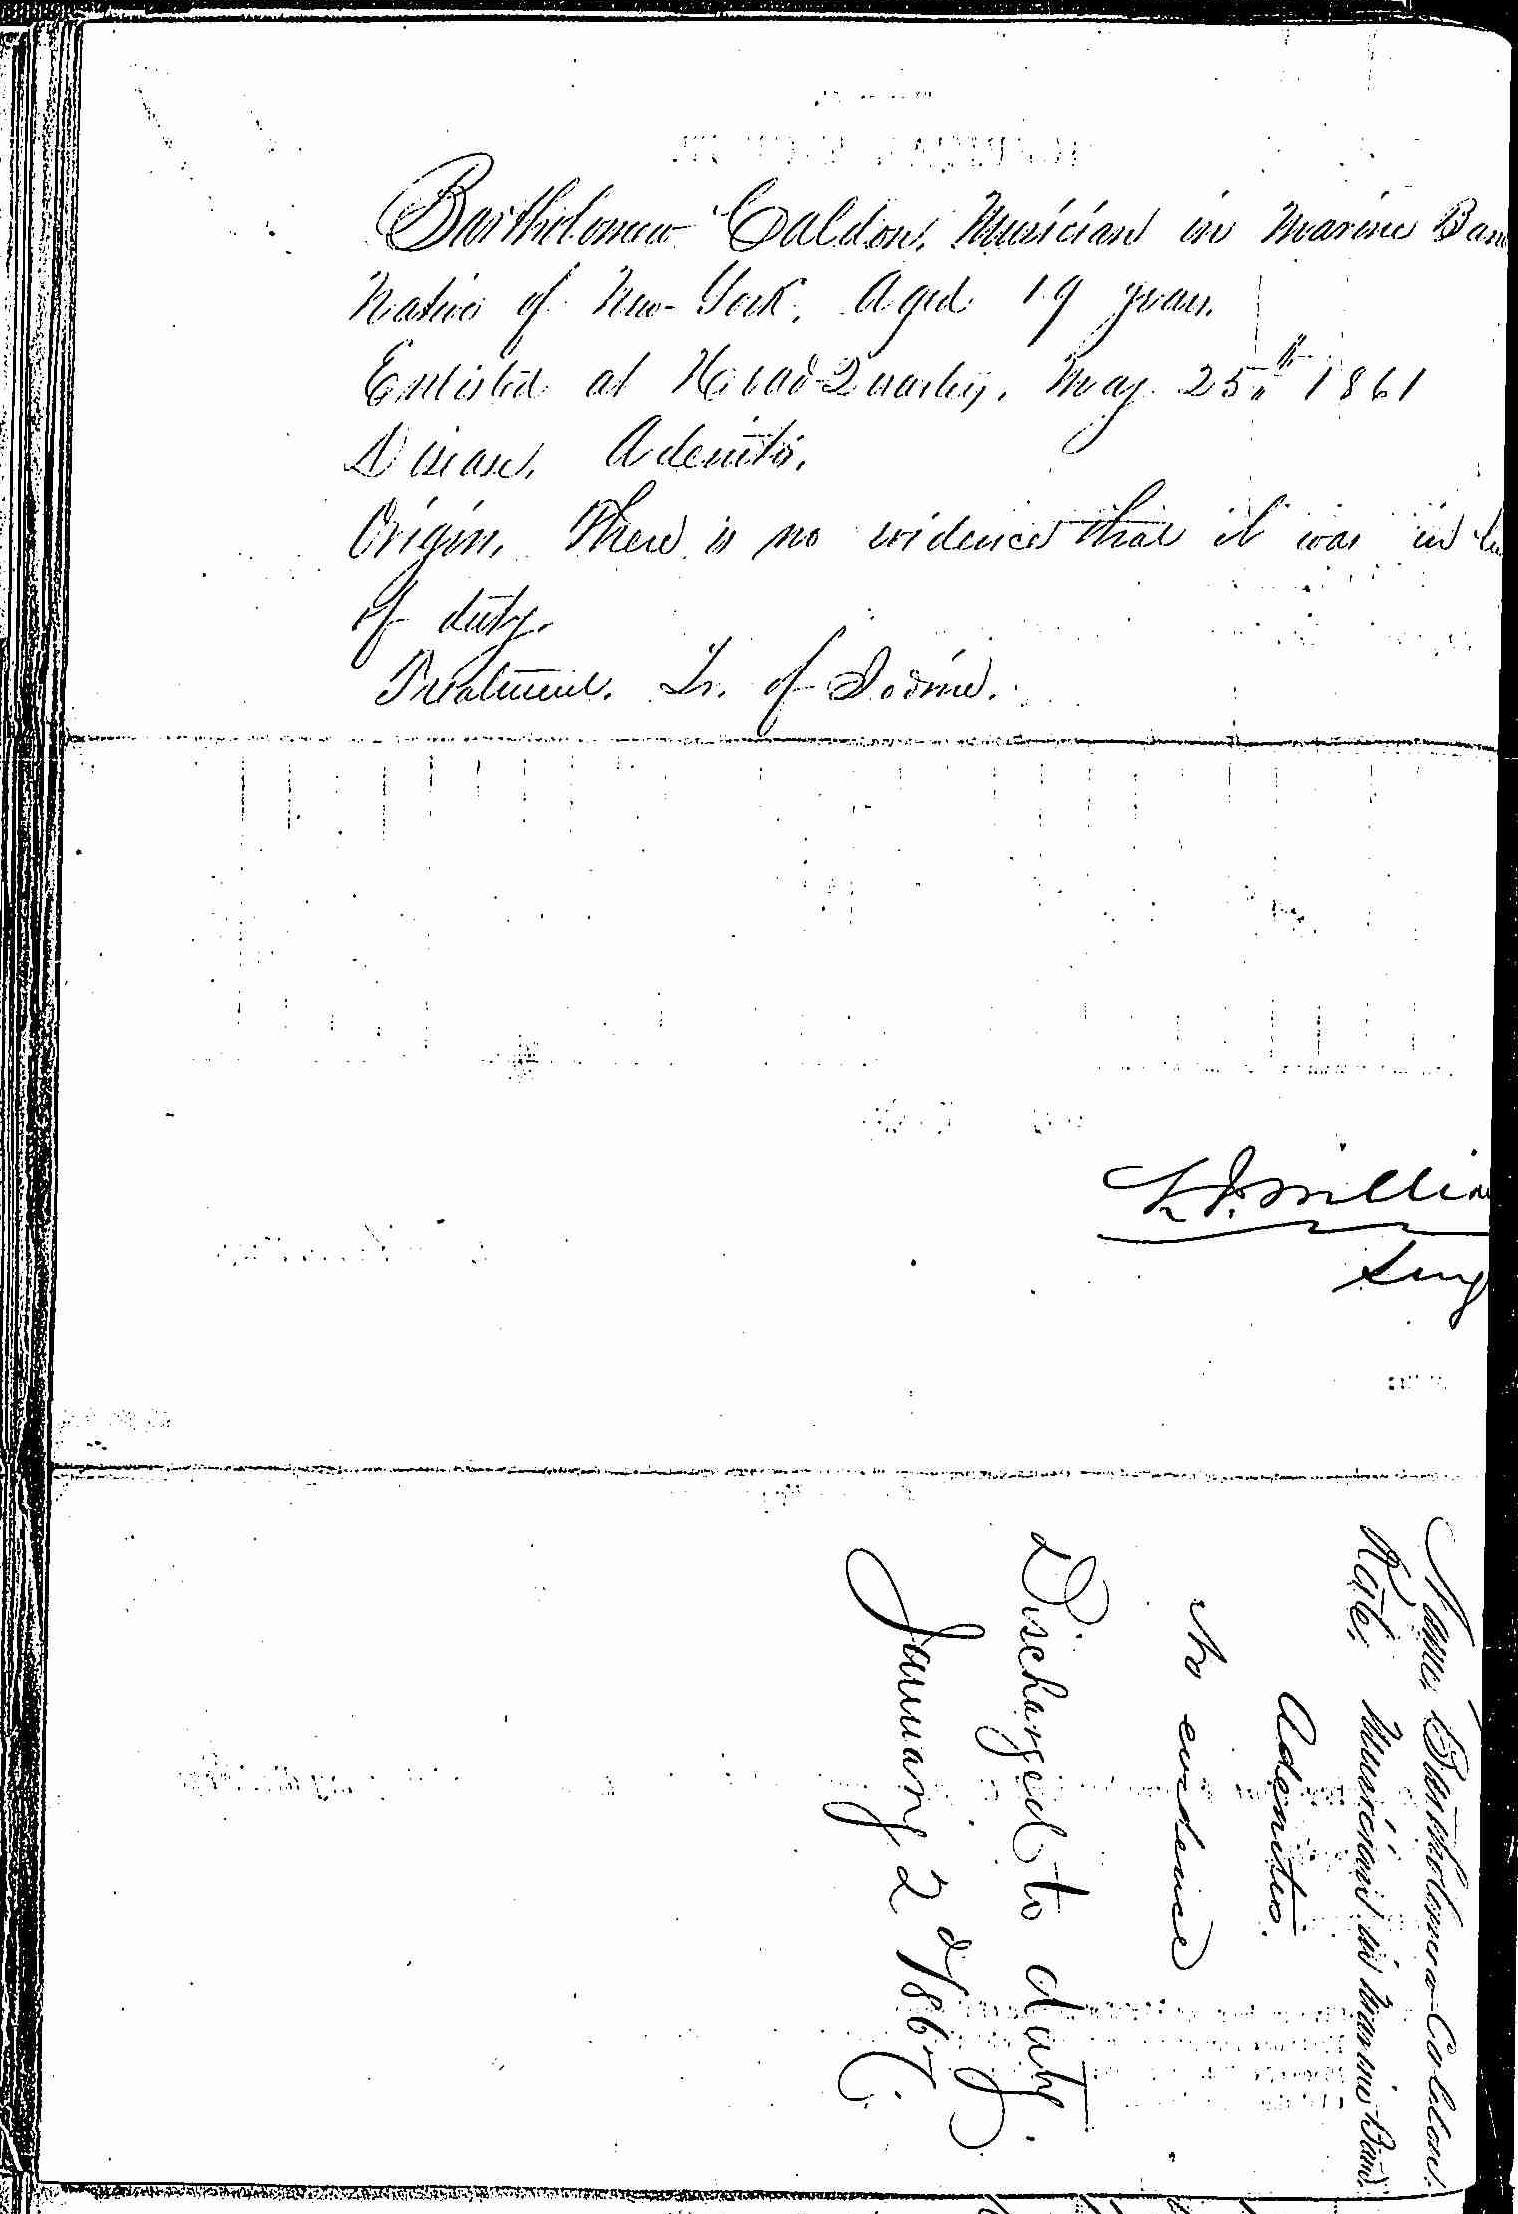 Entry for Bartholomew Caldon (page 2 of 2) in the log Hospital Tickets and Case Papers - Naval Hospital - Washington, D.C. - 1865-68